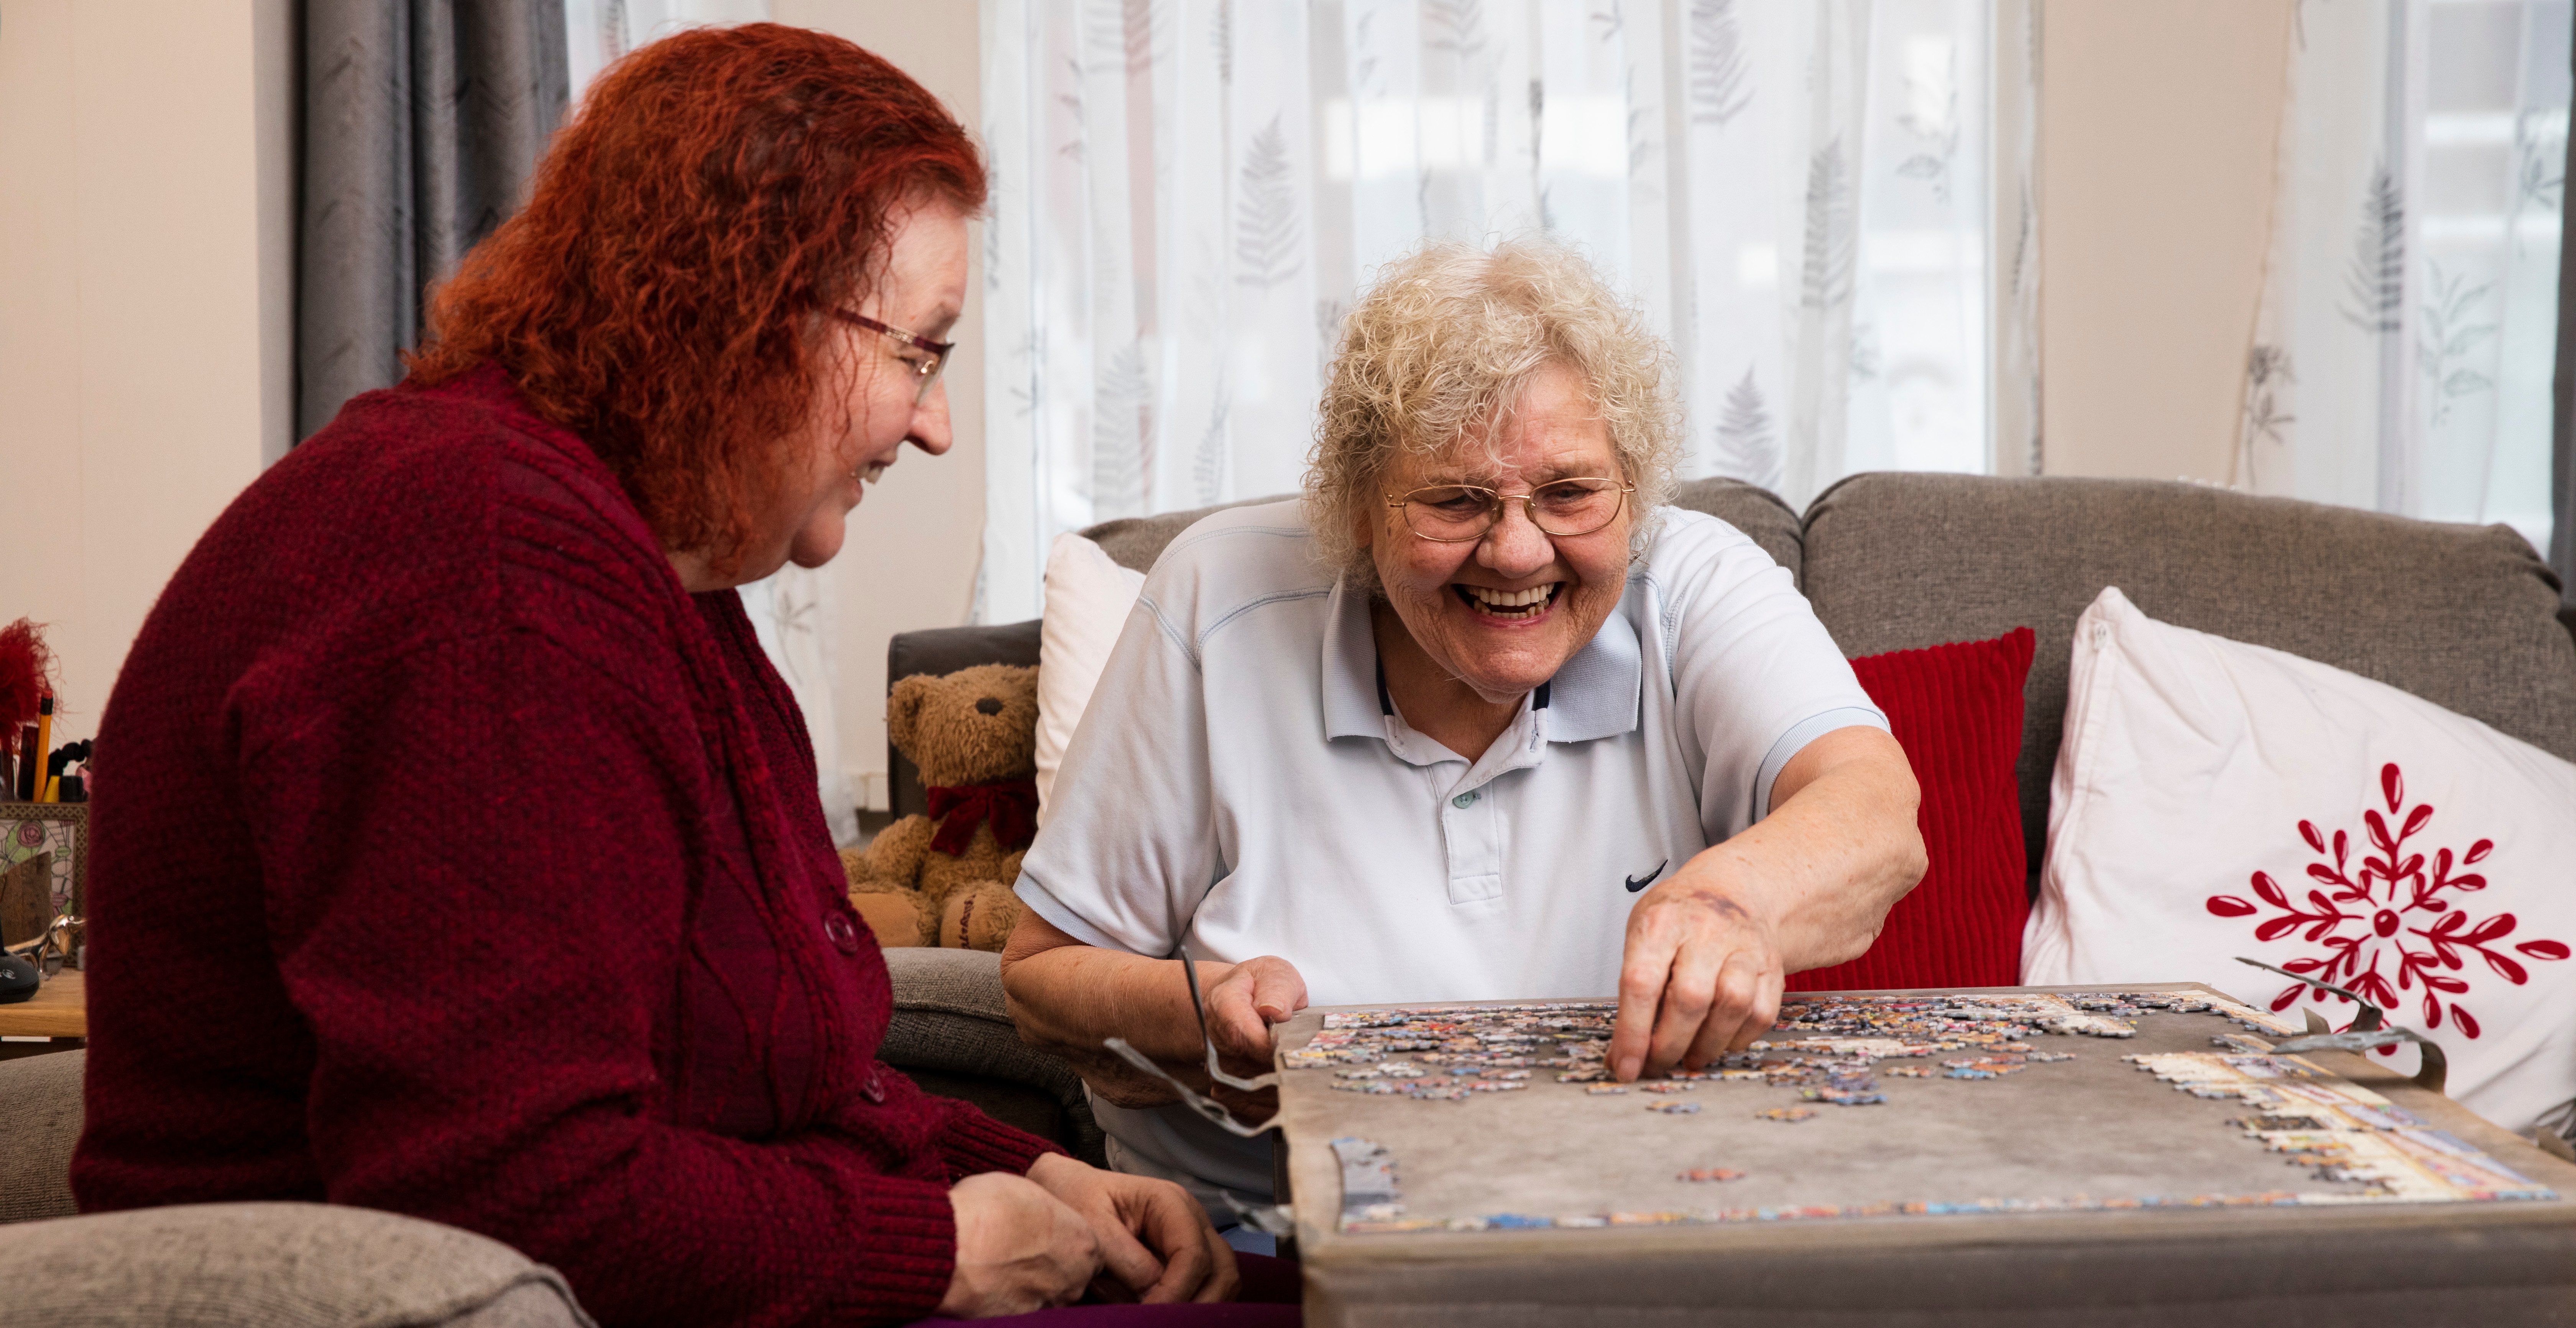 The contribution of collaborative housing to social care in later life